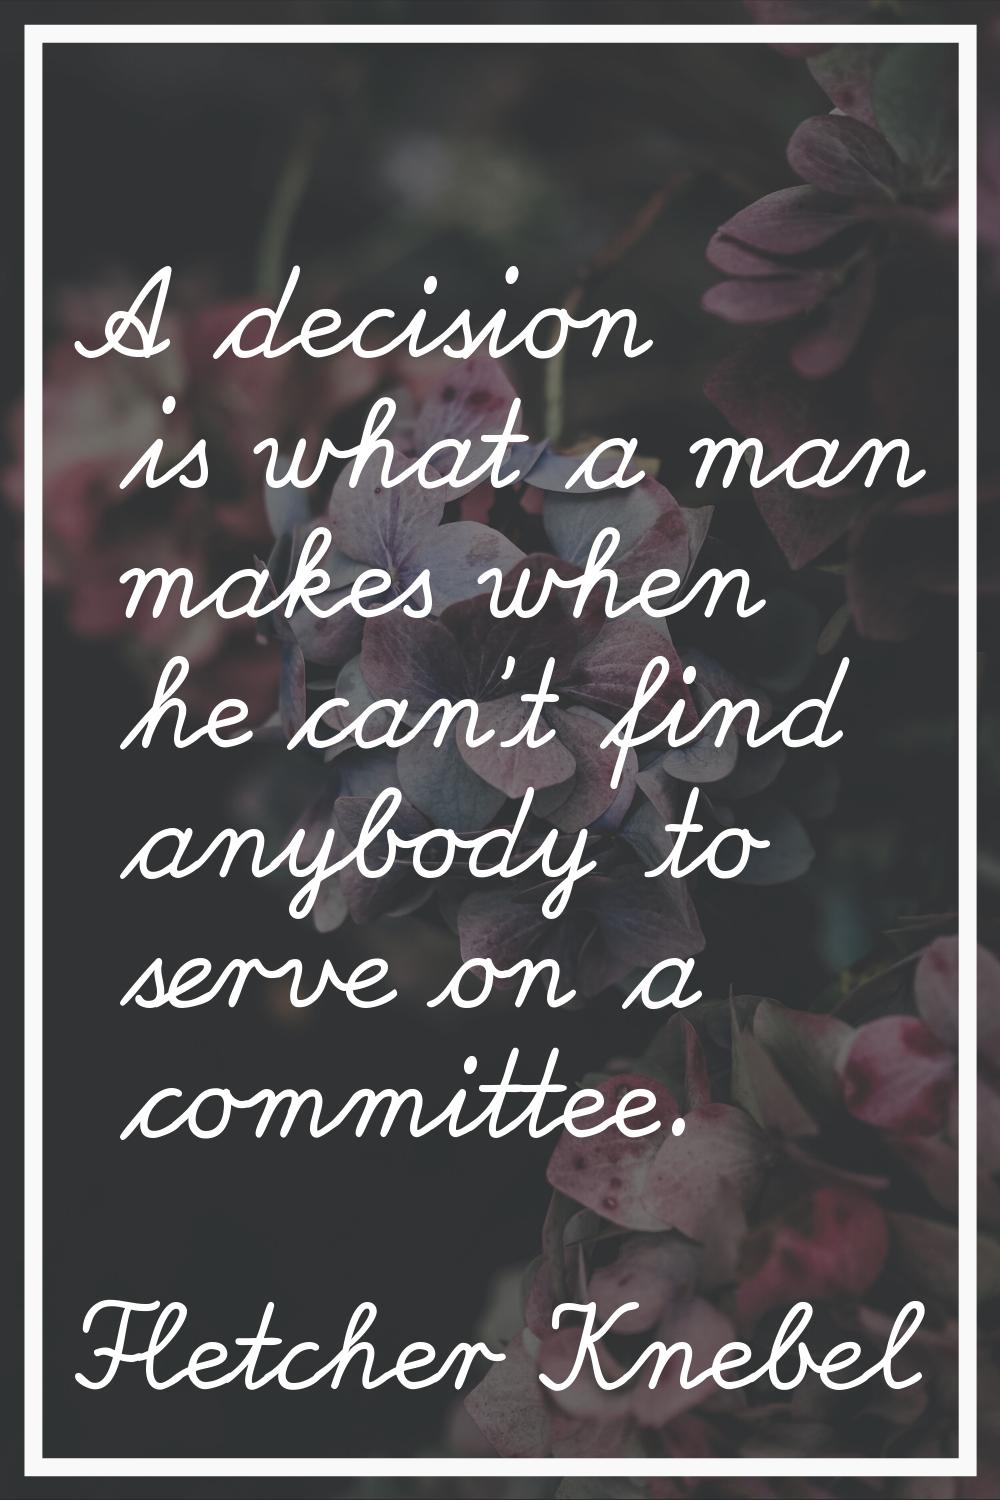 A decision is what a man makes when he can't find anybody to serve on a committee.